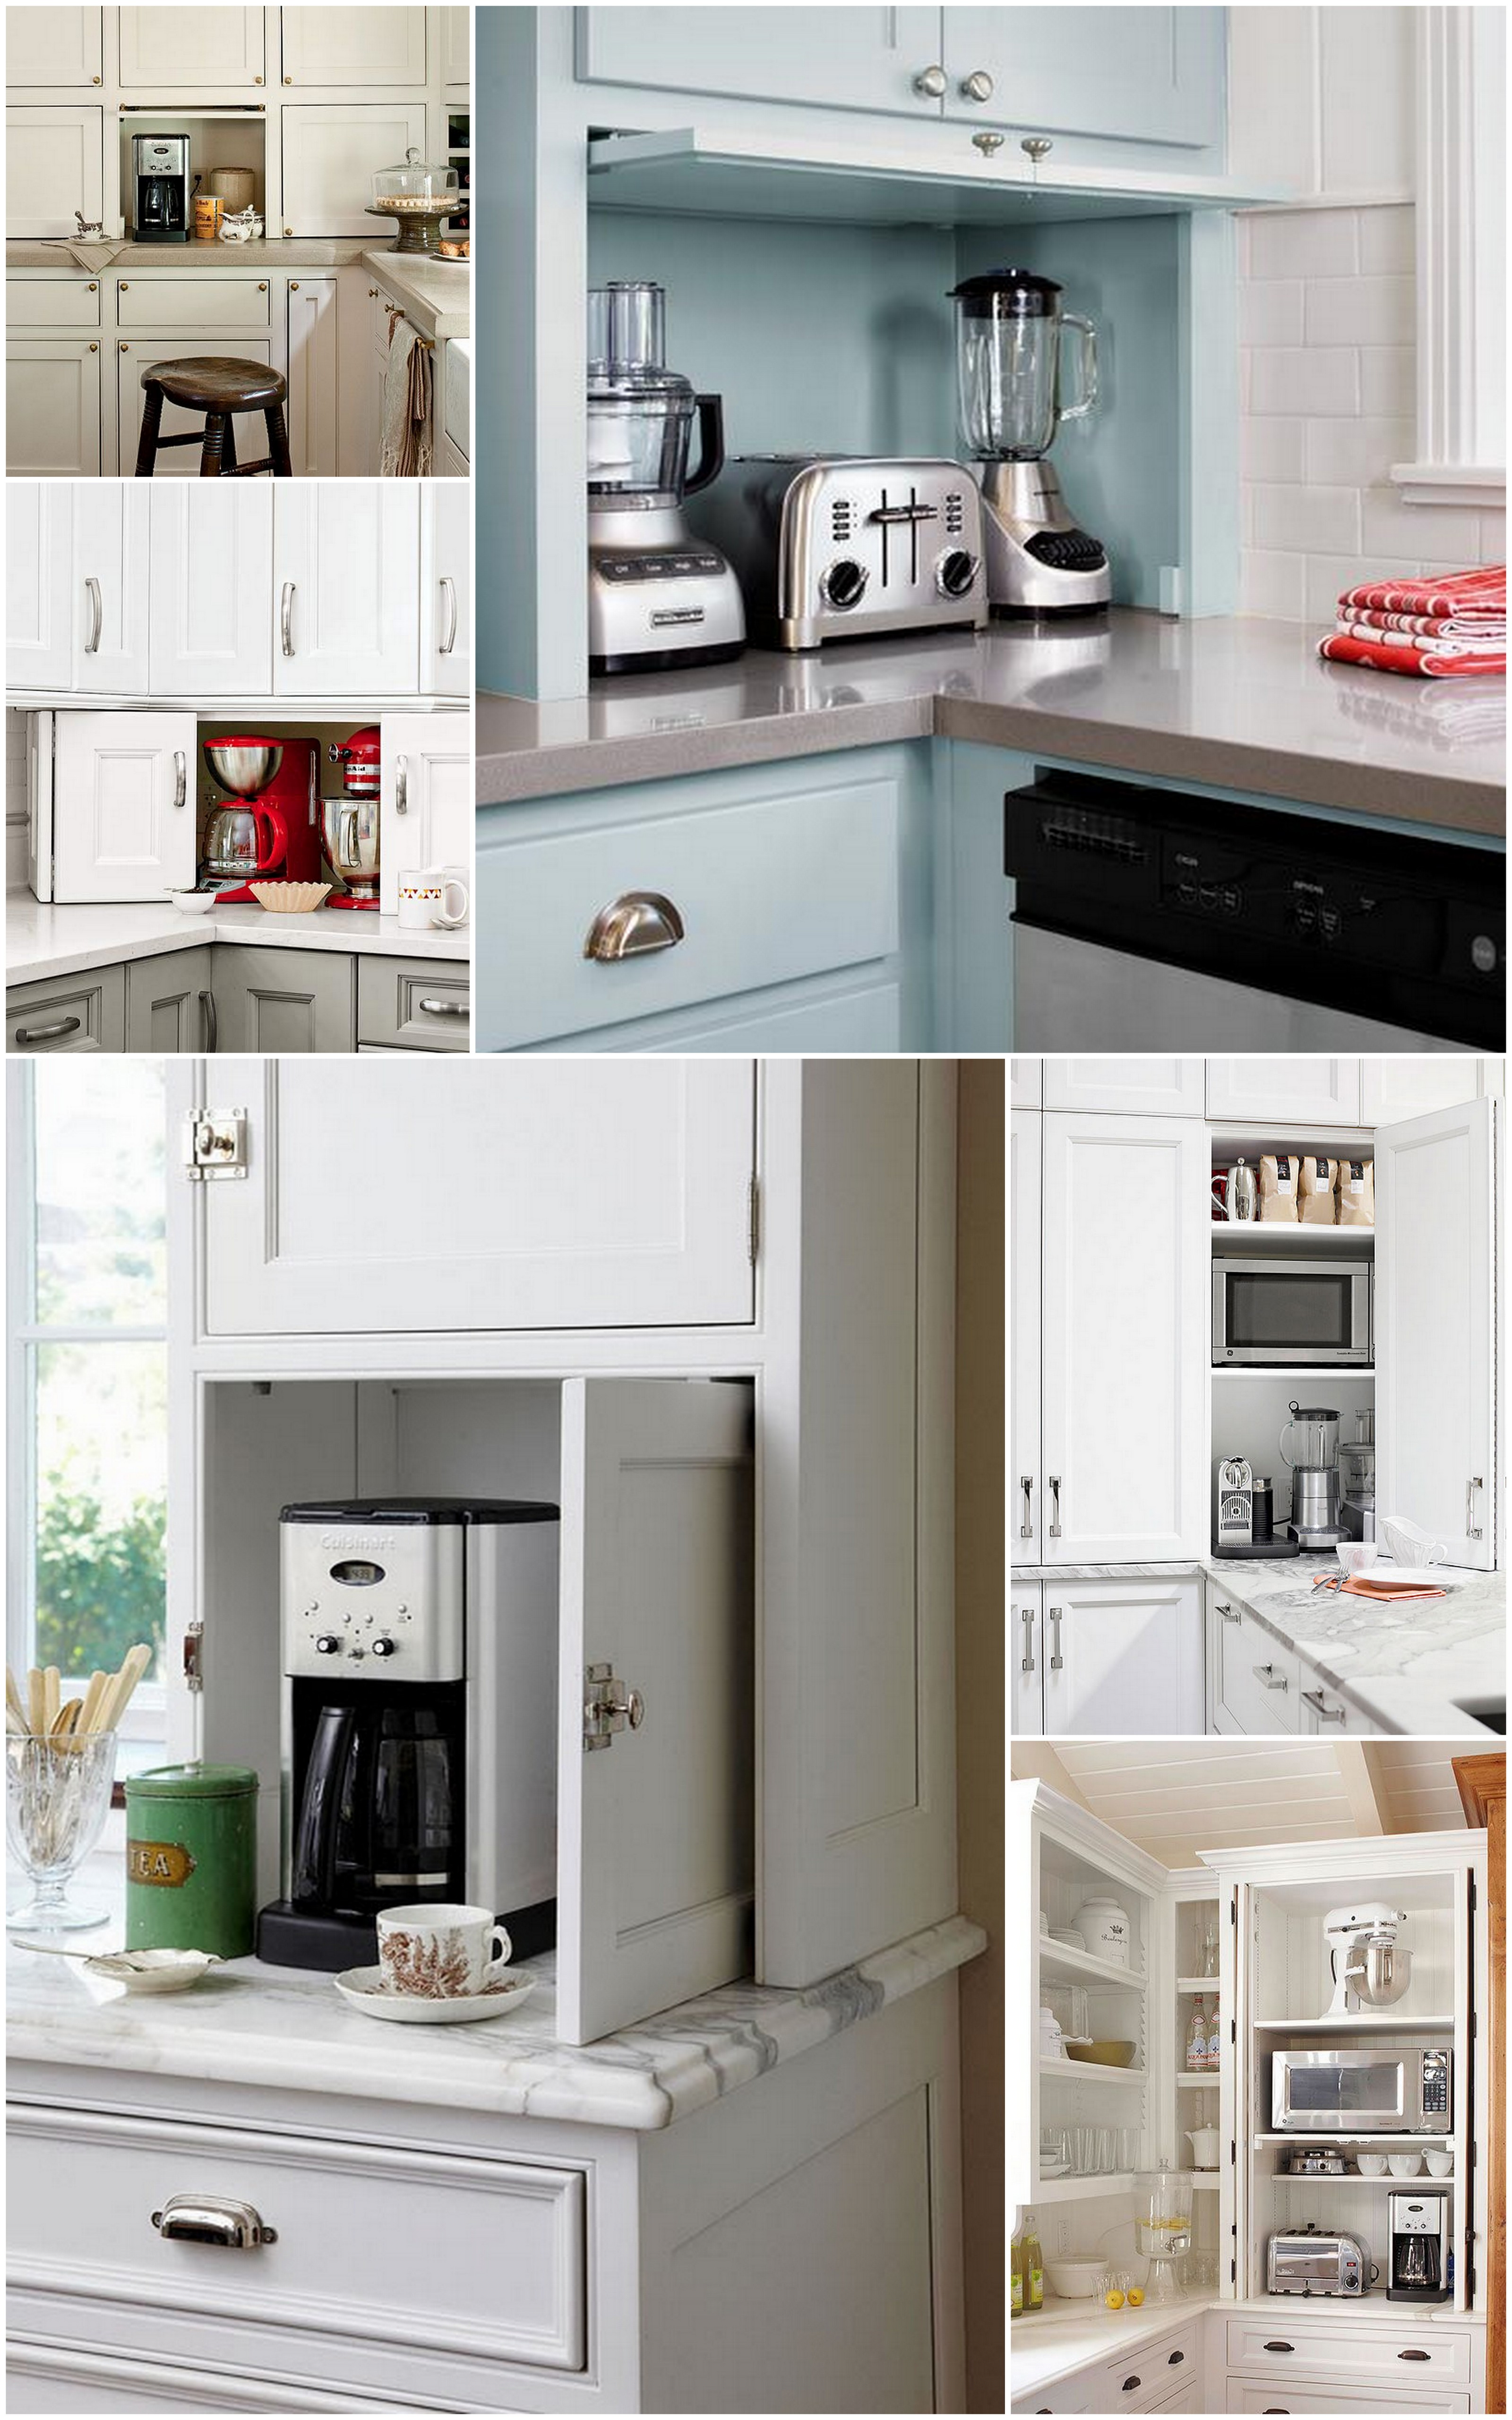 The Ideal Kitchen: Appliance Storage | Live Simply by Annie